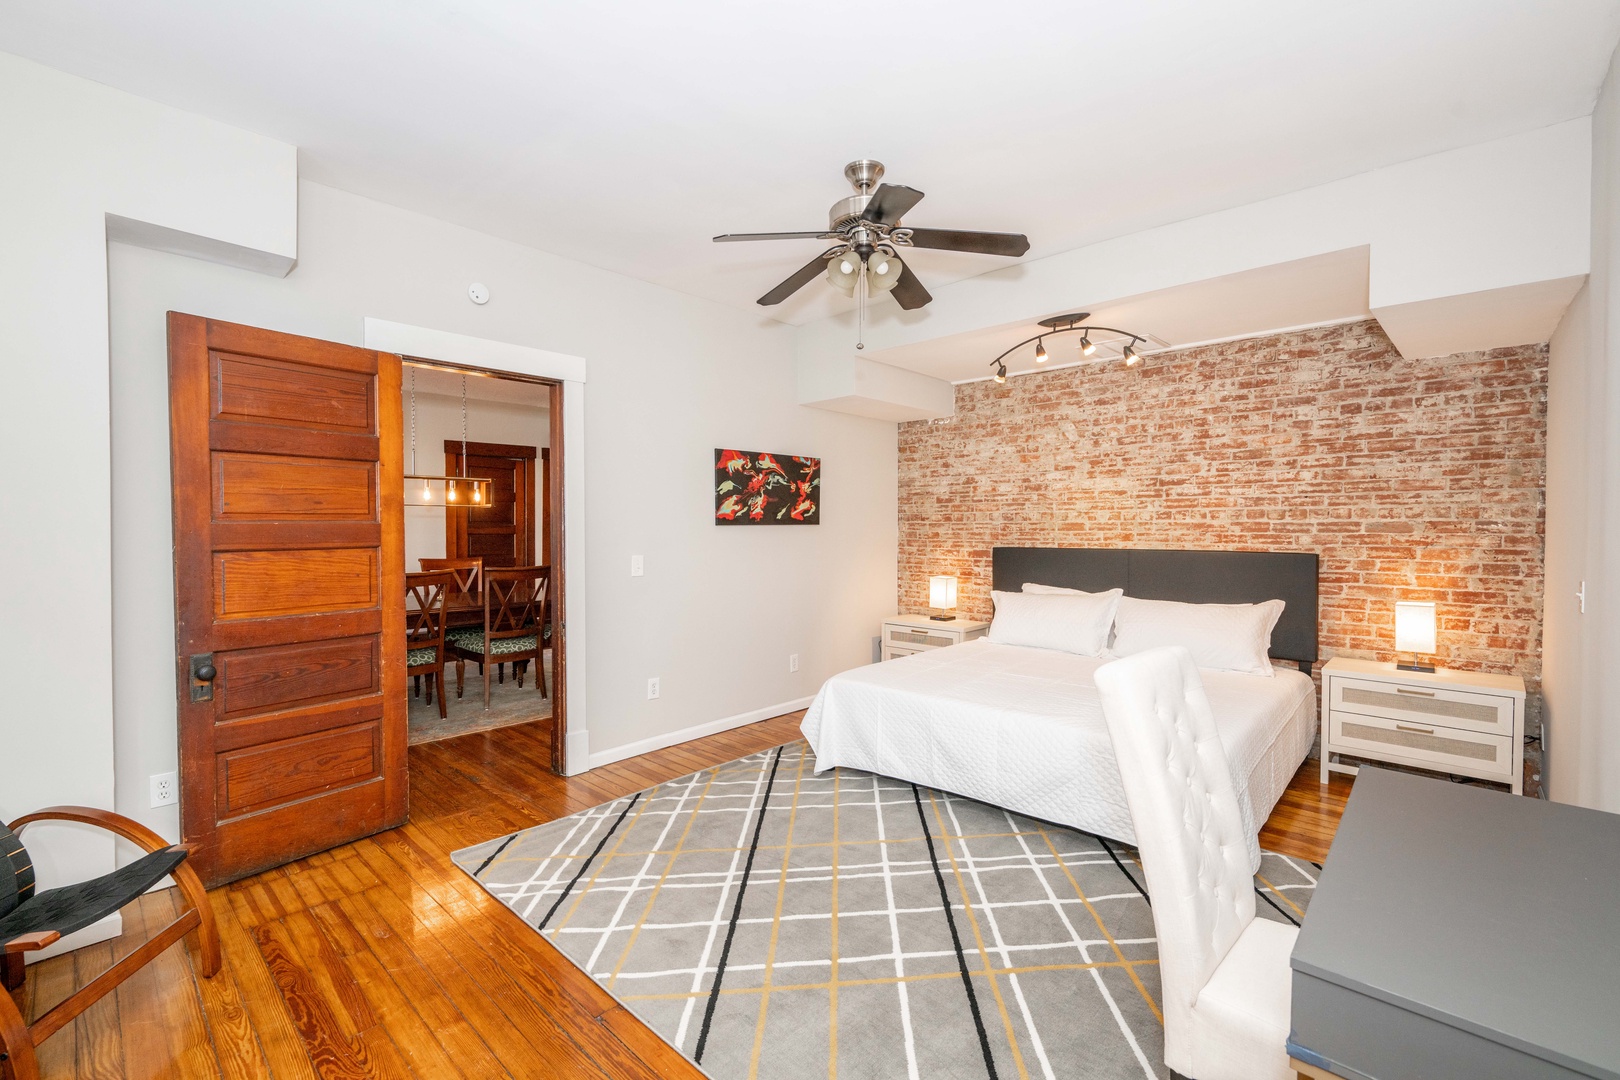 This spacious bedroom features a king-sized bed, Smart TV, & desk workspace